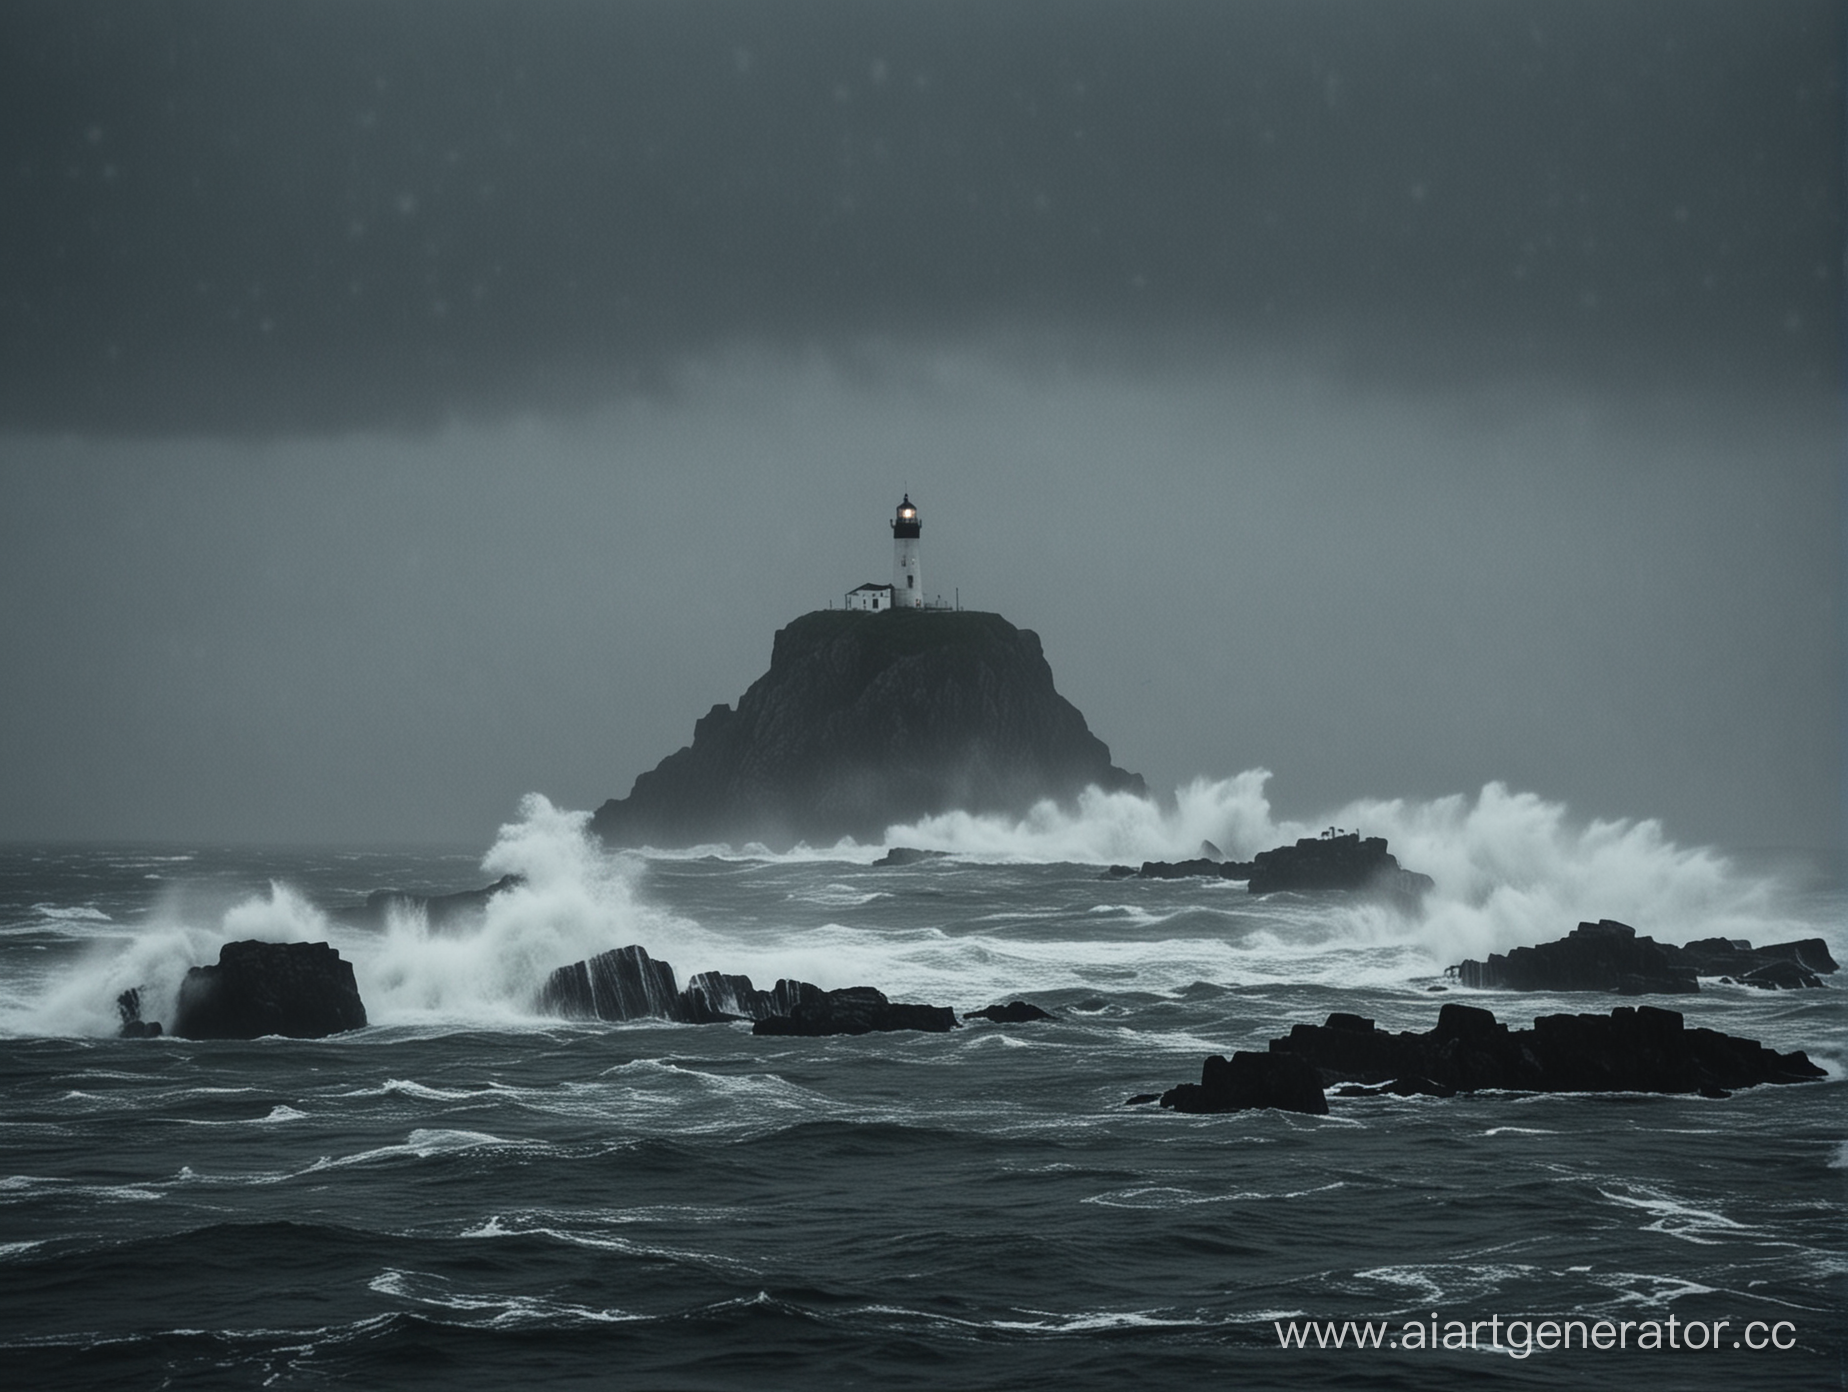 Very stormy sea, heavy rain, thunderstorm. On the left is a rocky island, on which stands a lonely lighthouse. Night. The lighthouse is standing alone, there is still fog. The lighthouse is close to the camera, just to the right. The lighthouse stands close to the camera. The sea is black in color.

